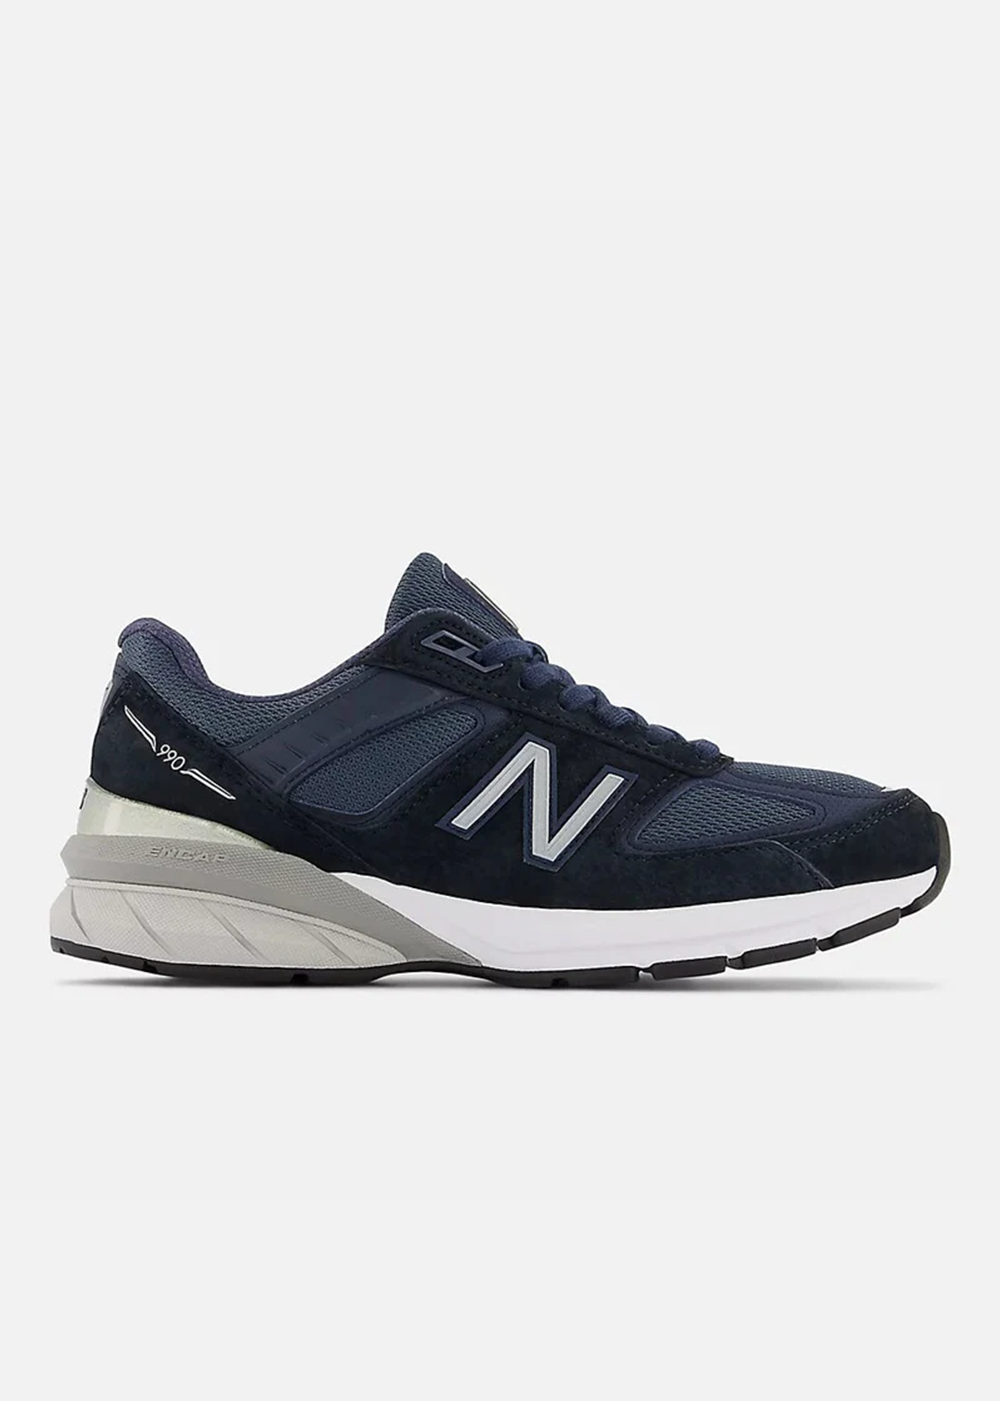 New Balance 990v5 Unisex Made in USA Sneakers - Navy